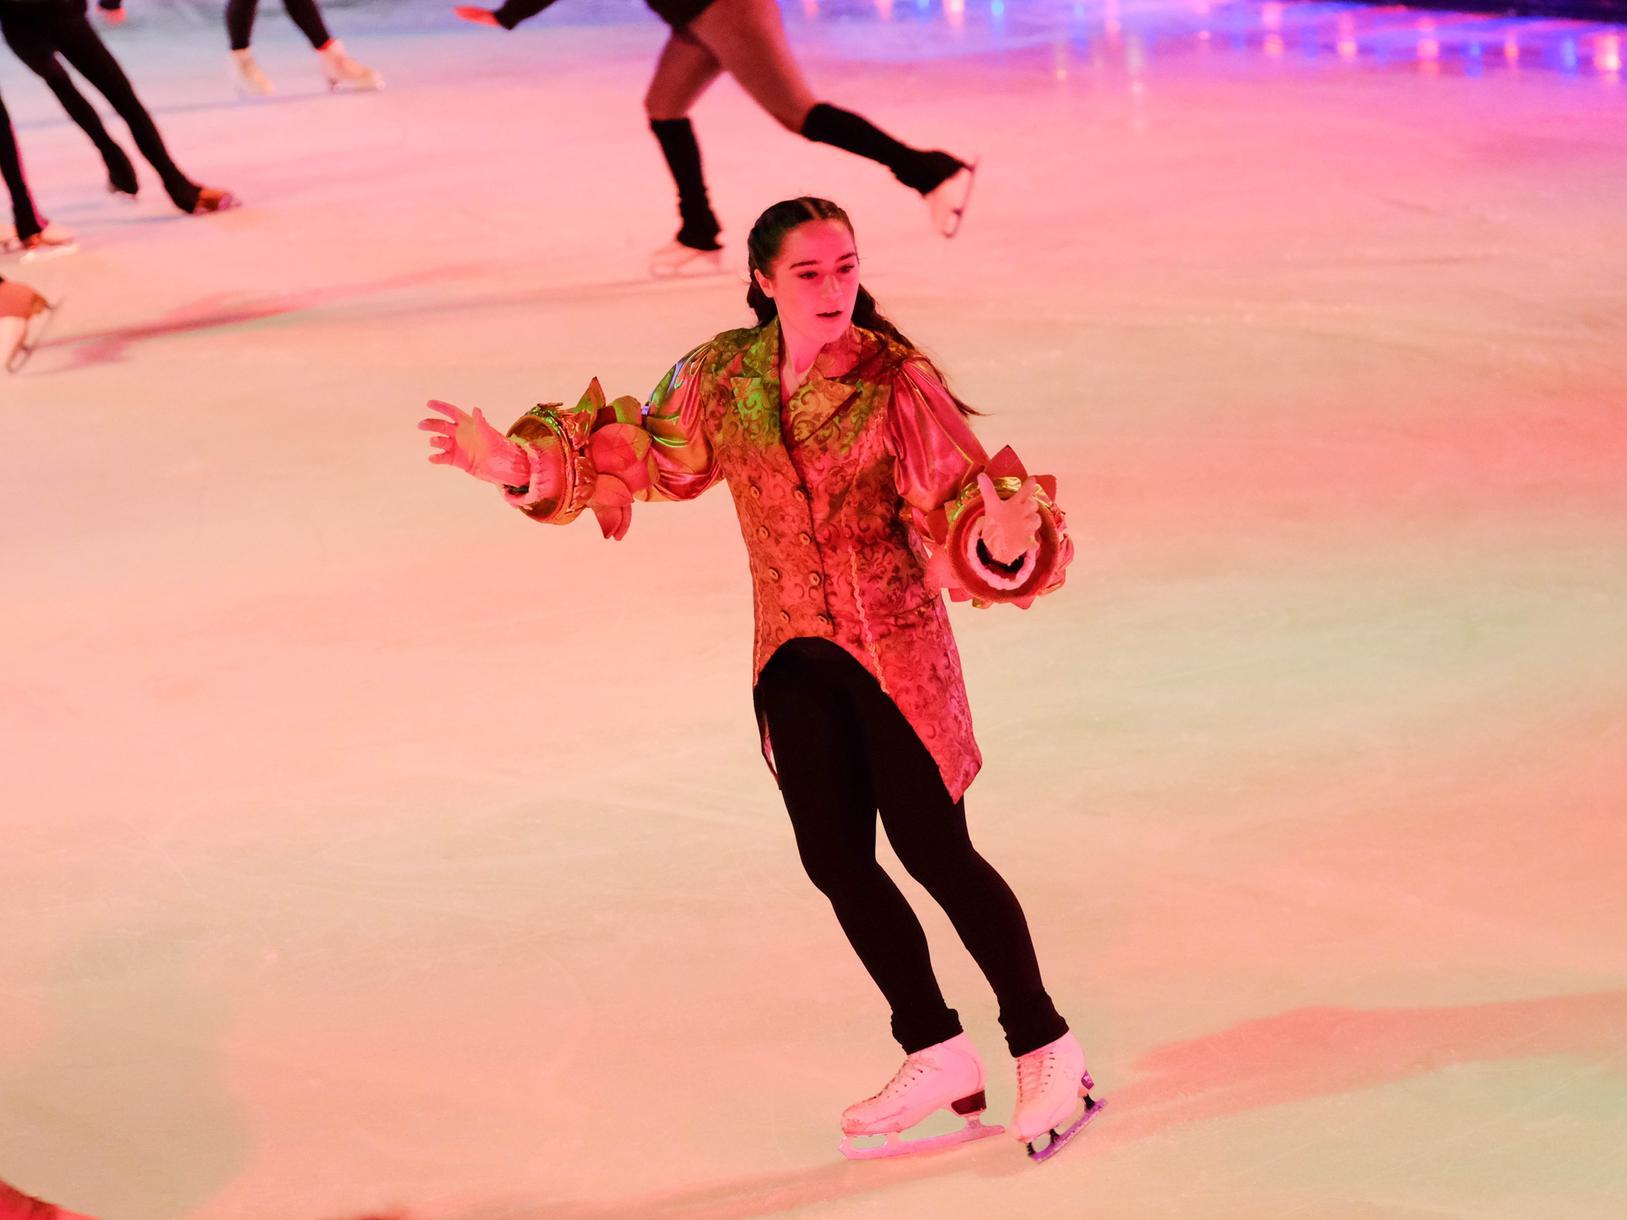 This year's ice skating talent come's from all over Lancashire.